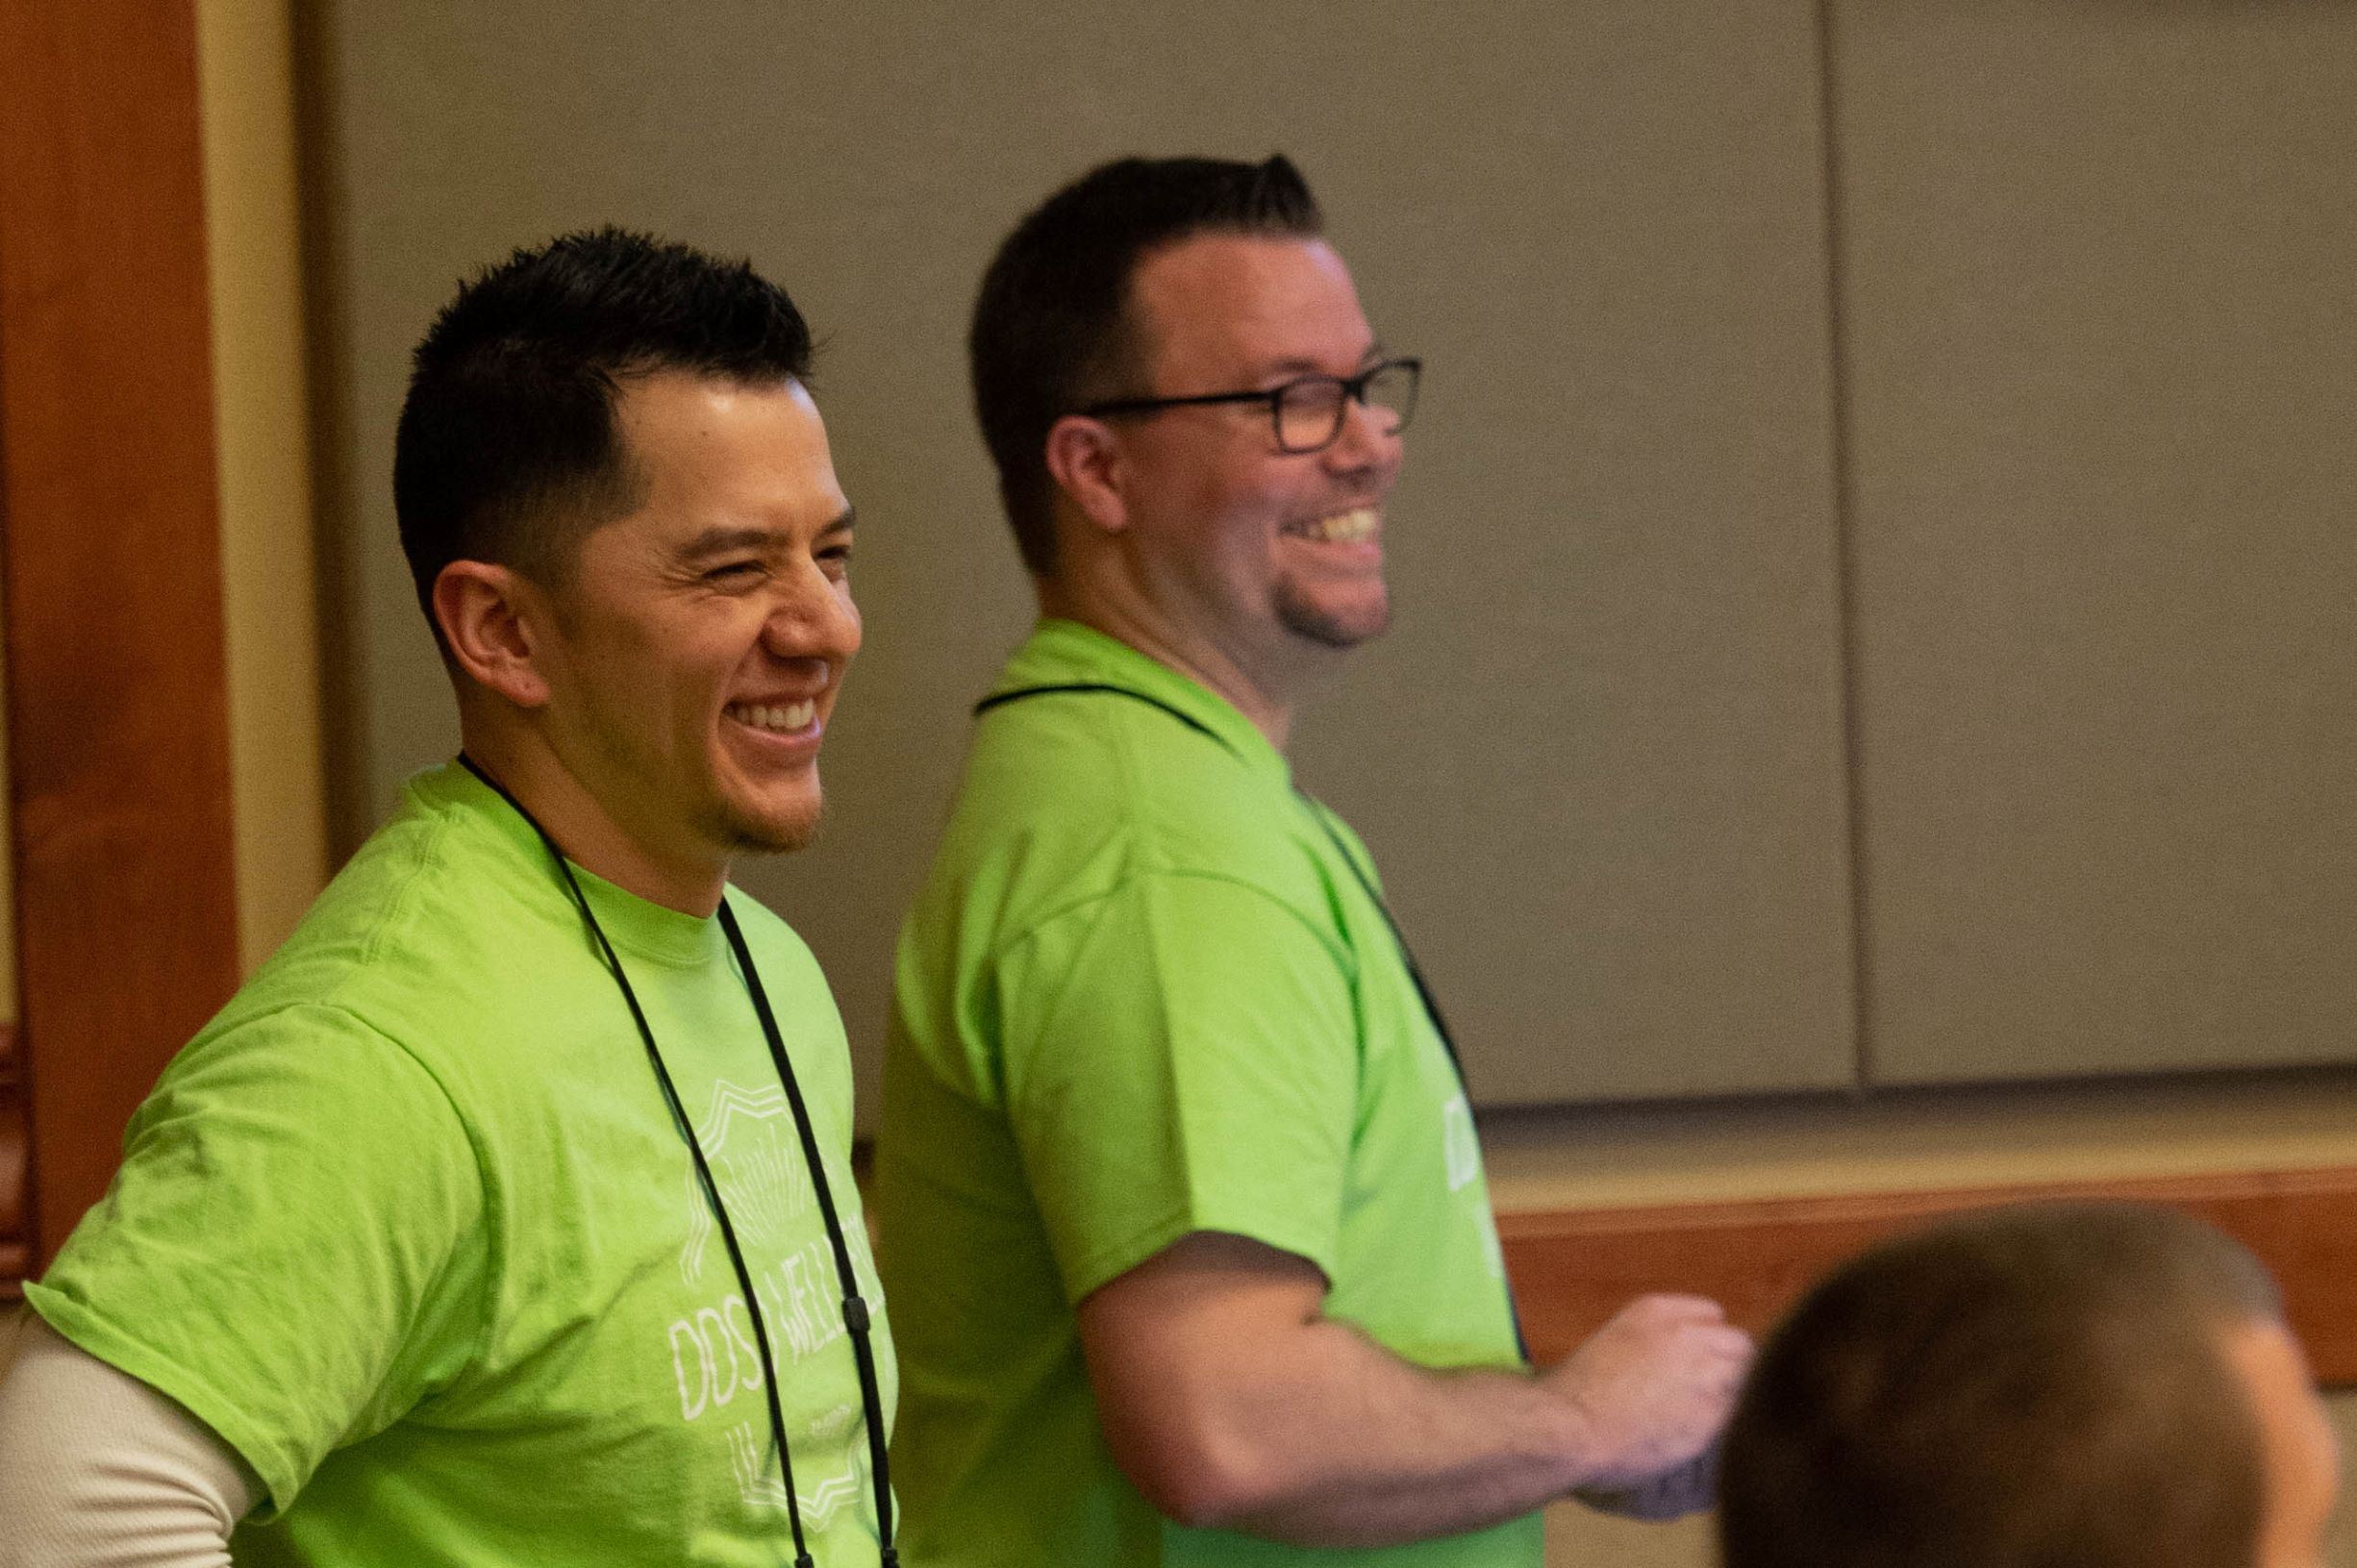 two people in green shirts laughing